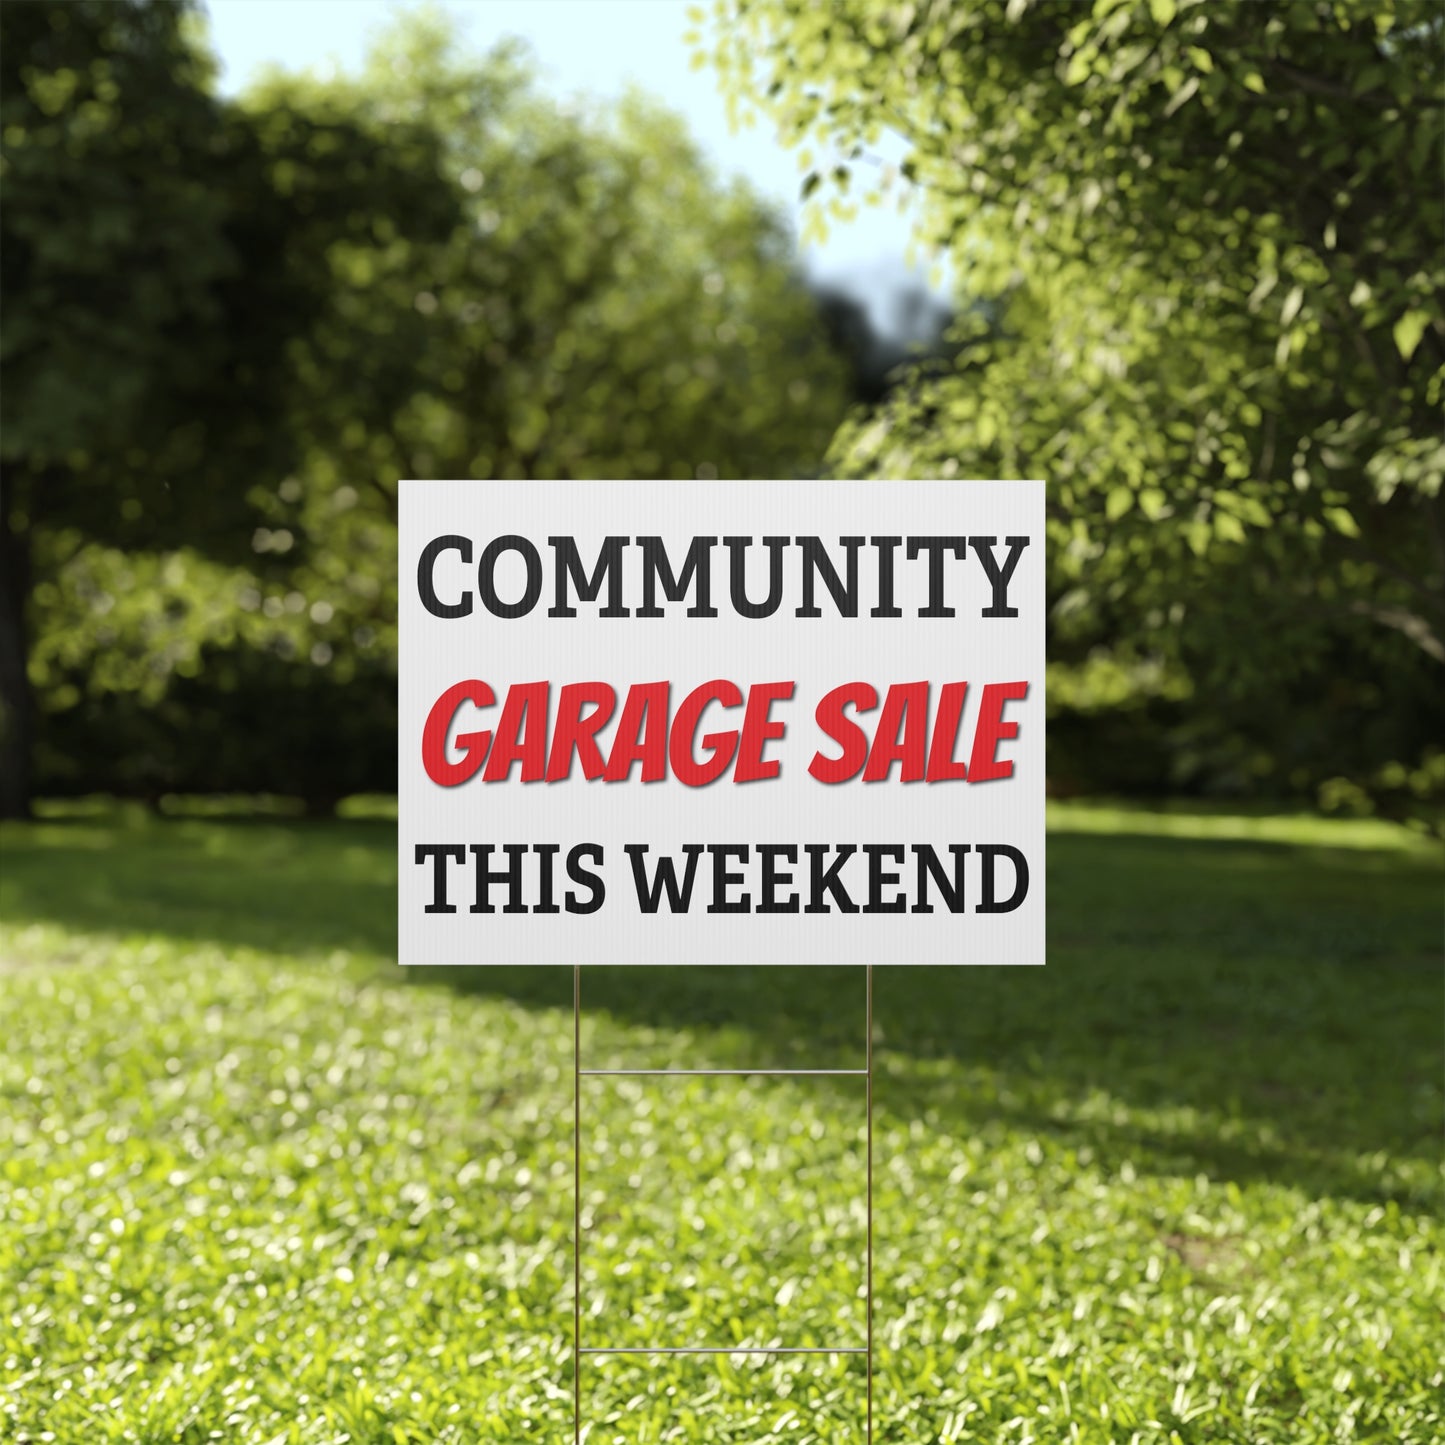 Community Garage Sale, Yard Sale Sign, 24x18 or 36x24 inch, Double Sided, H-Stake Included, v3